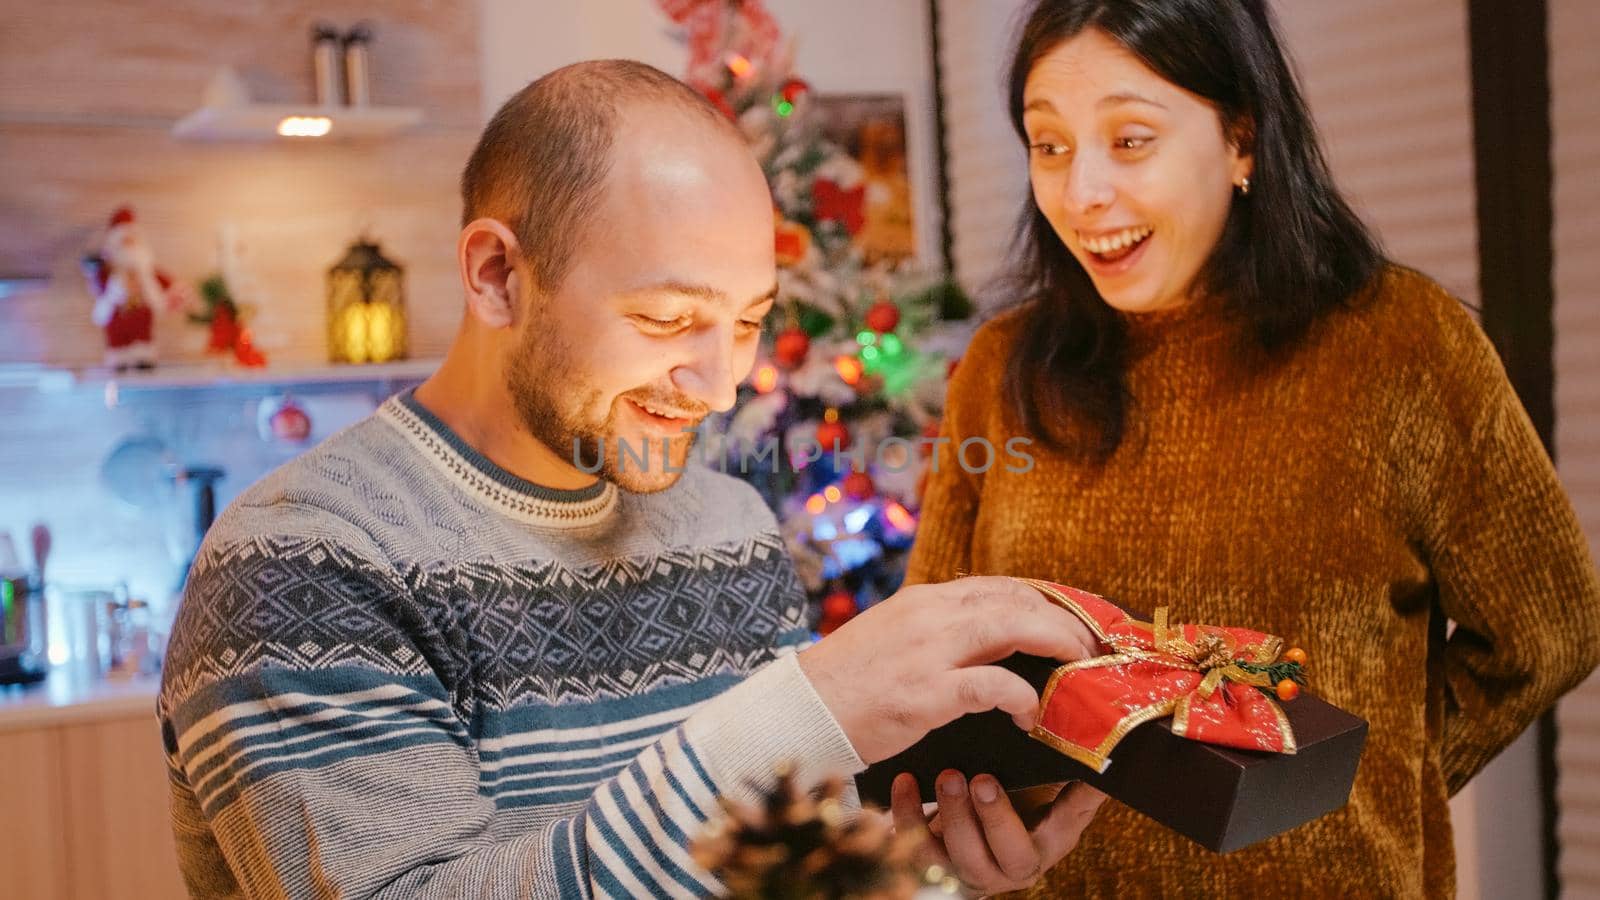 Festive woman giving present box to man celebrating christmas eve. Couple kissing and hugging after opening gift with ribbon and seasonal ornaments for winter holiday celebration.